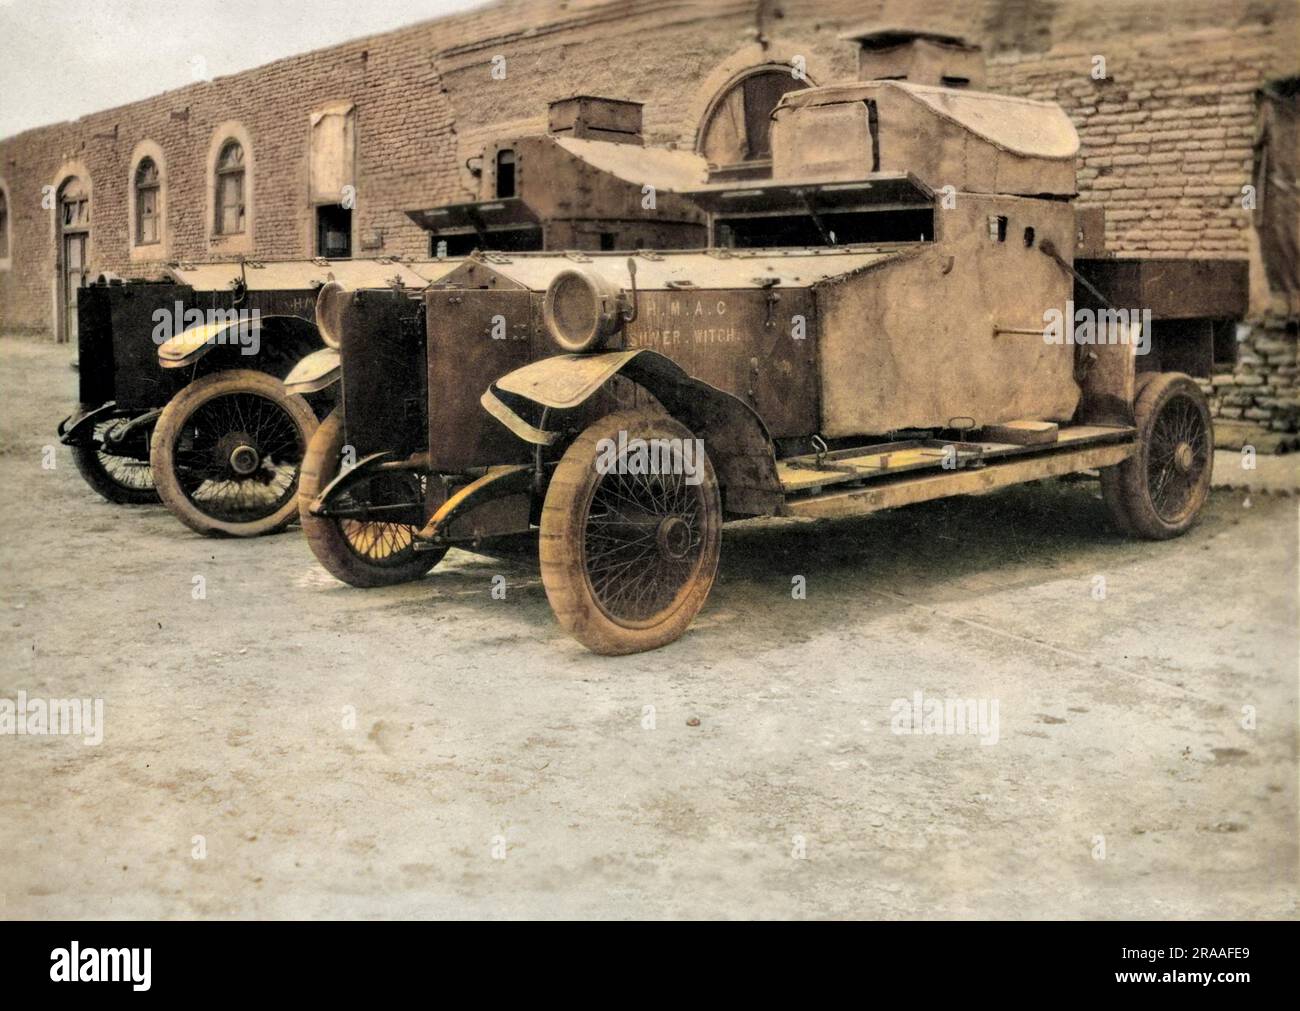 WW1 - Two armour plated army vehicles, labelled HMAC Silver Witch.     Date: circa 1917 Stock Photo